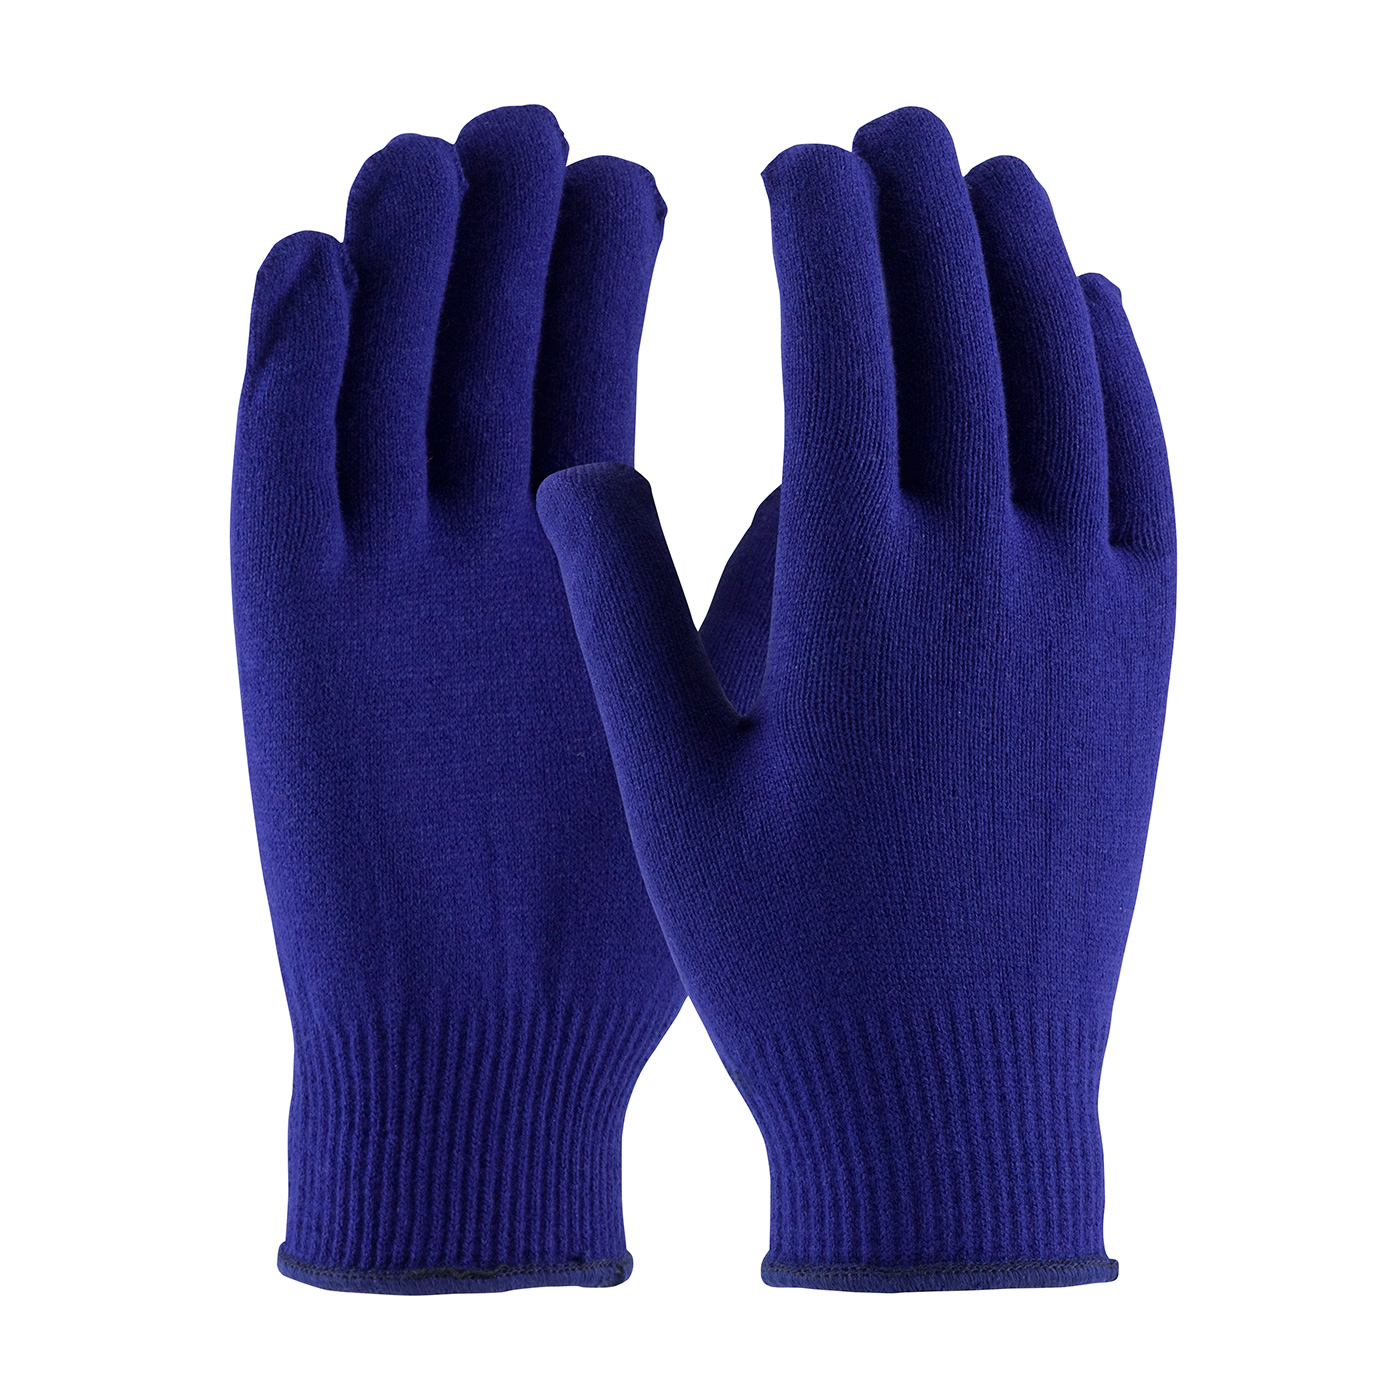 Gloves and Liners